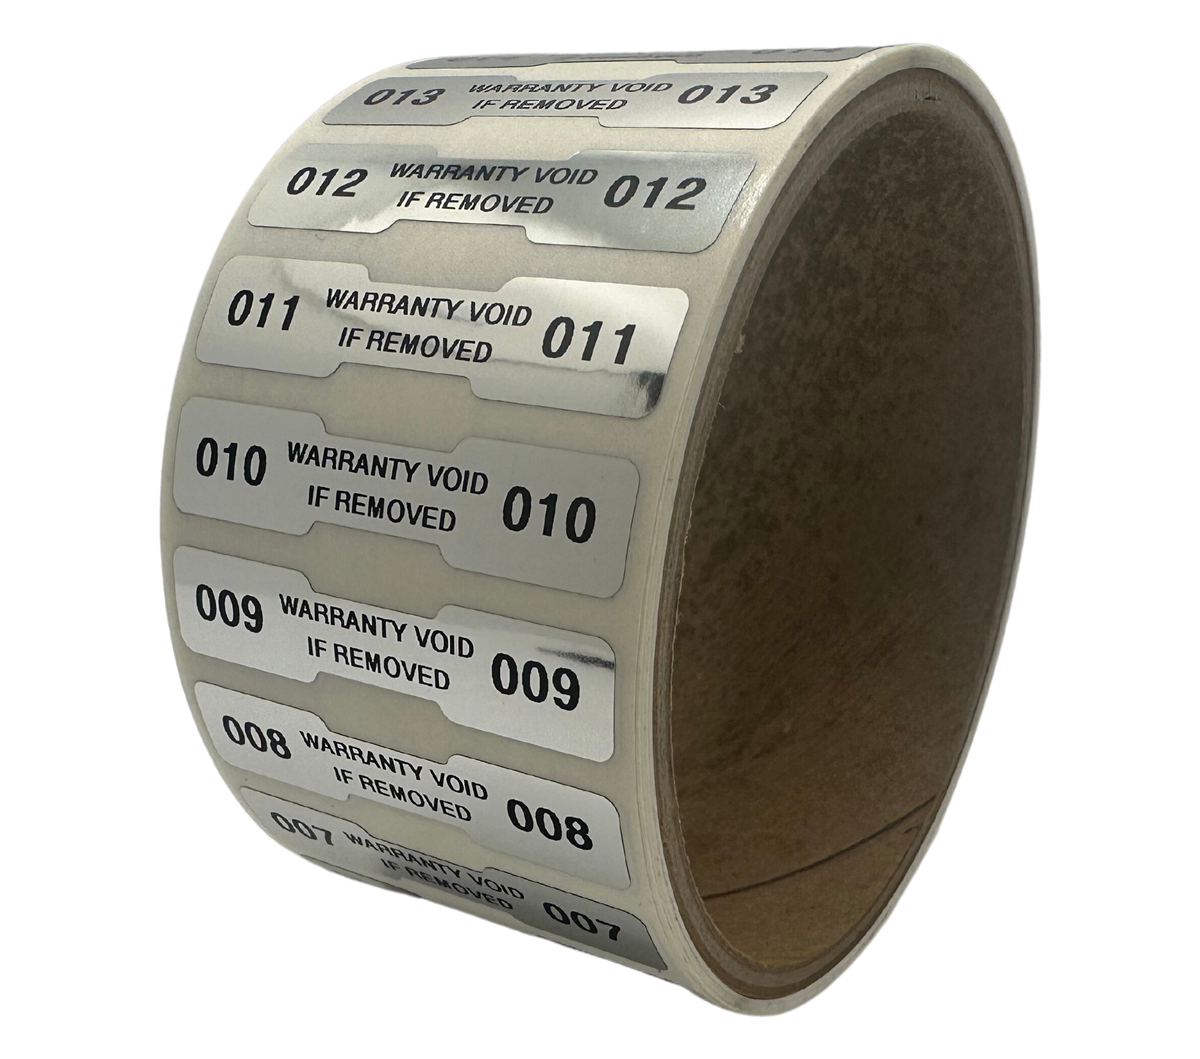 1,000 Finish Tamper Evident Metallic Silver / Chrome Non Residue Security Labels TamperGuard® Seal Sticker, Dogbone 1.75" x 0.375" (44mm x 9mm). Printed: Warranty Void if Removed + Serialized